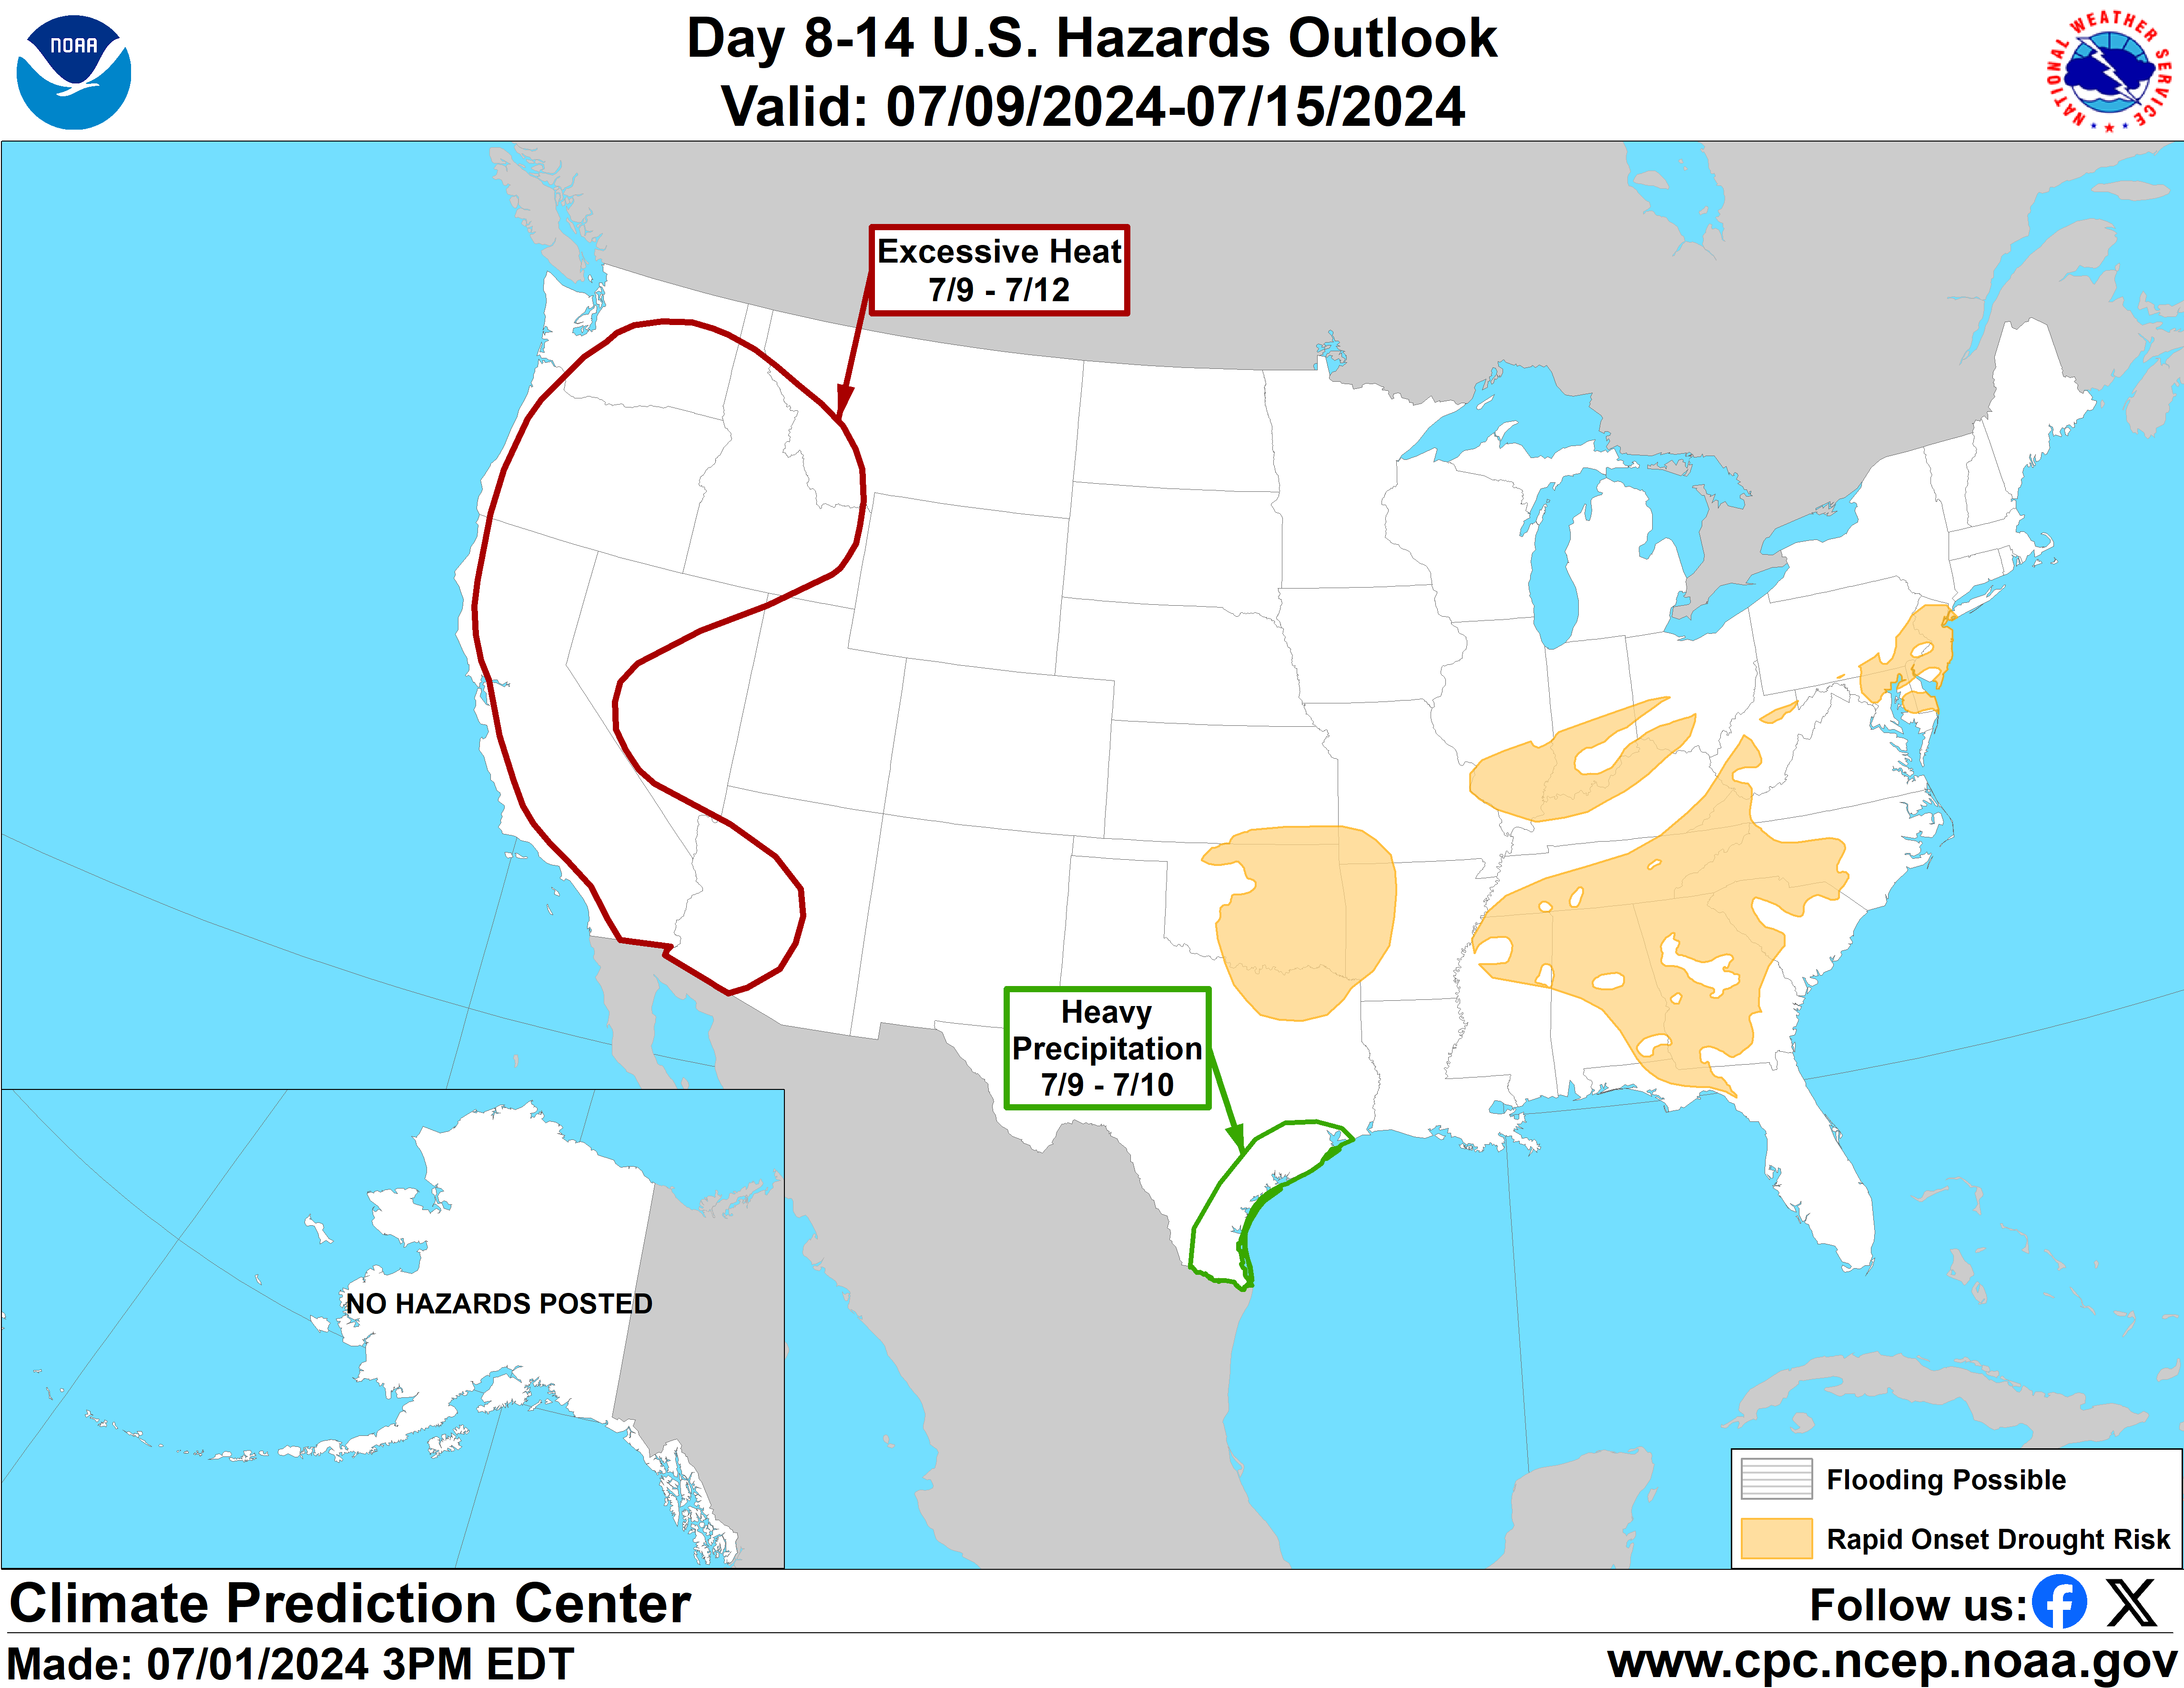 http://www.cpc.ncep.noaa.gov/products/predictions/threats/hazards_d8_14_contours.png